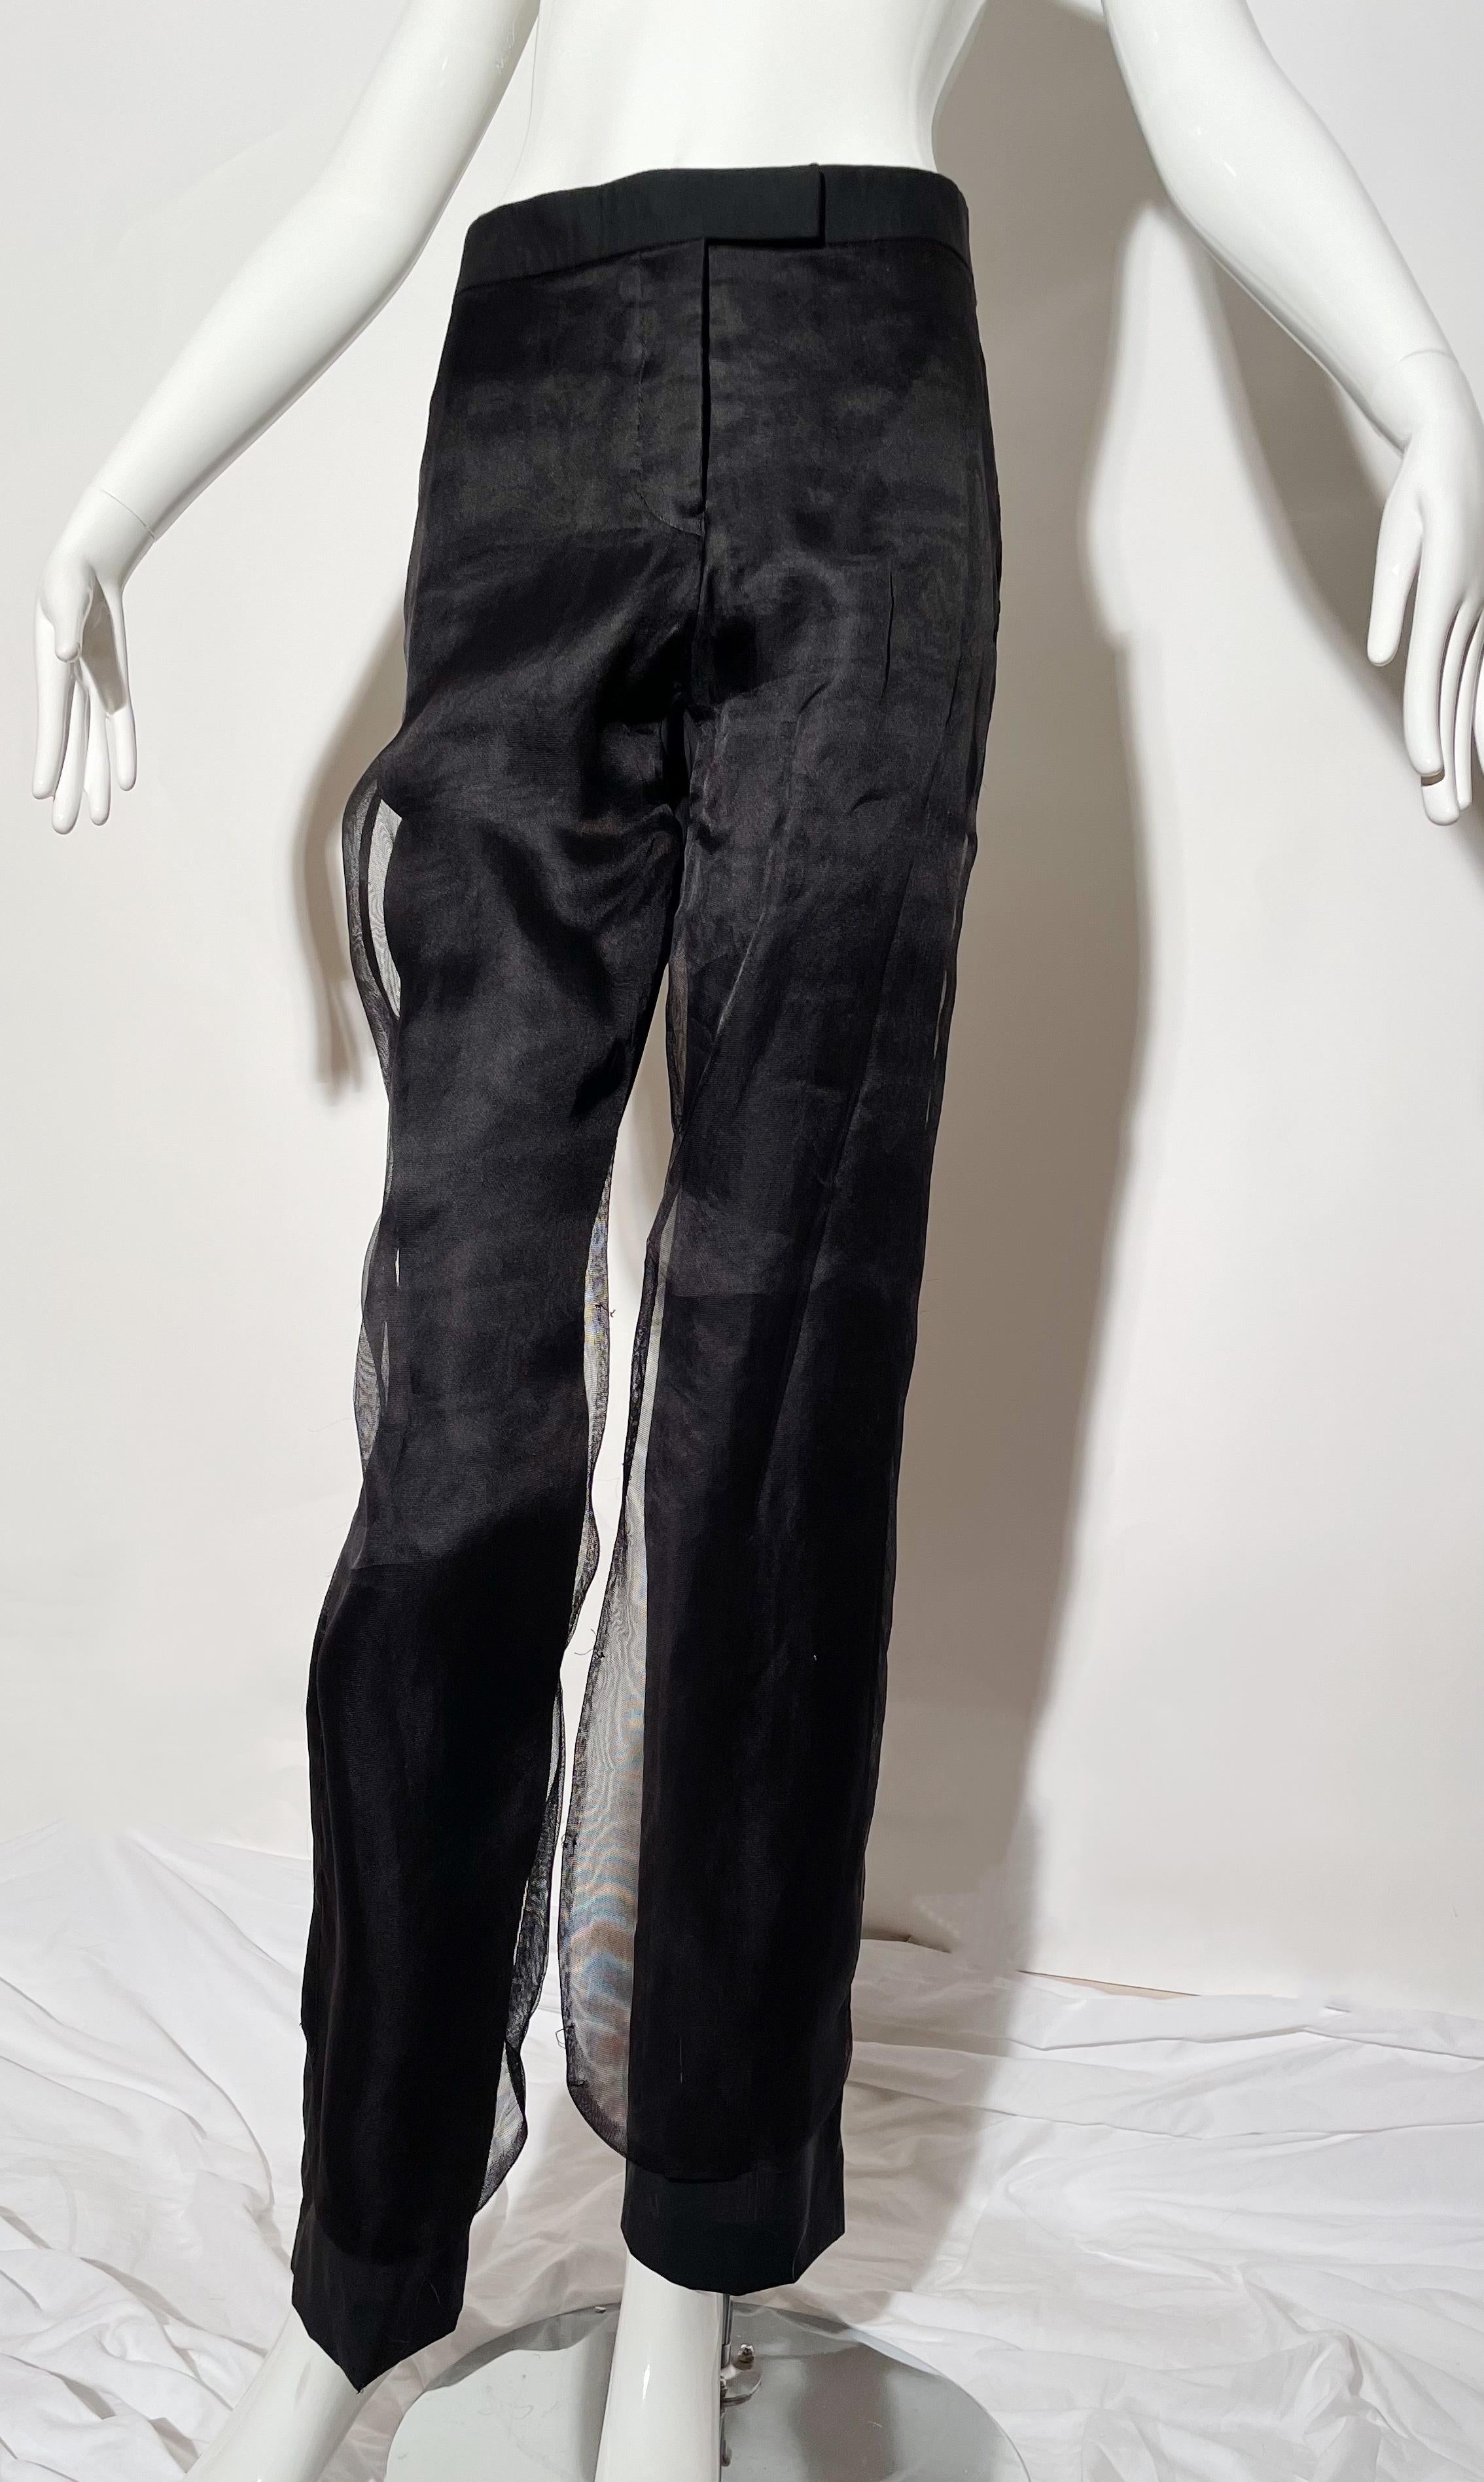 Black trousers with sheer mesh overlay. Tuxedo satin on side. Front and rear pockets. Front zipper closure. Wool and silk blend. Made in Italy.
*Condition: excellent vintage condition. No visible flaws.

Measurements Taken Laying Flat